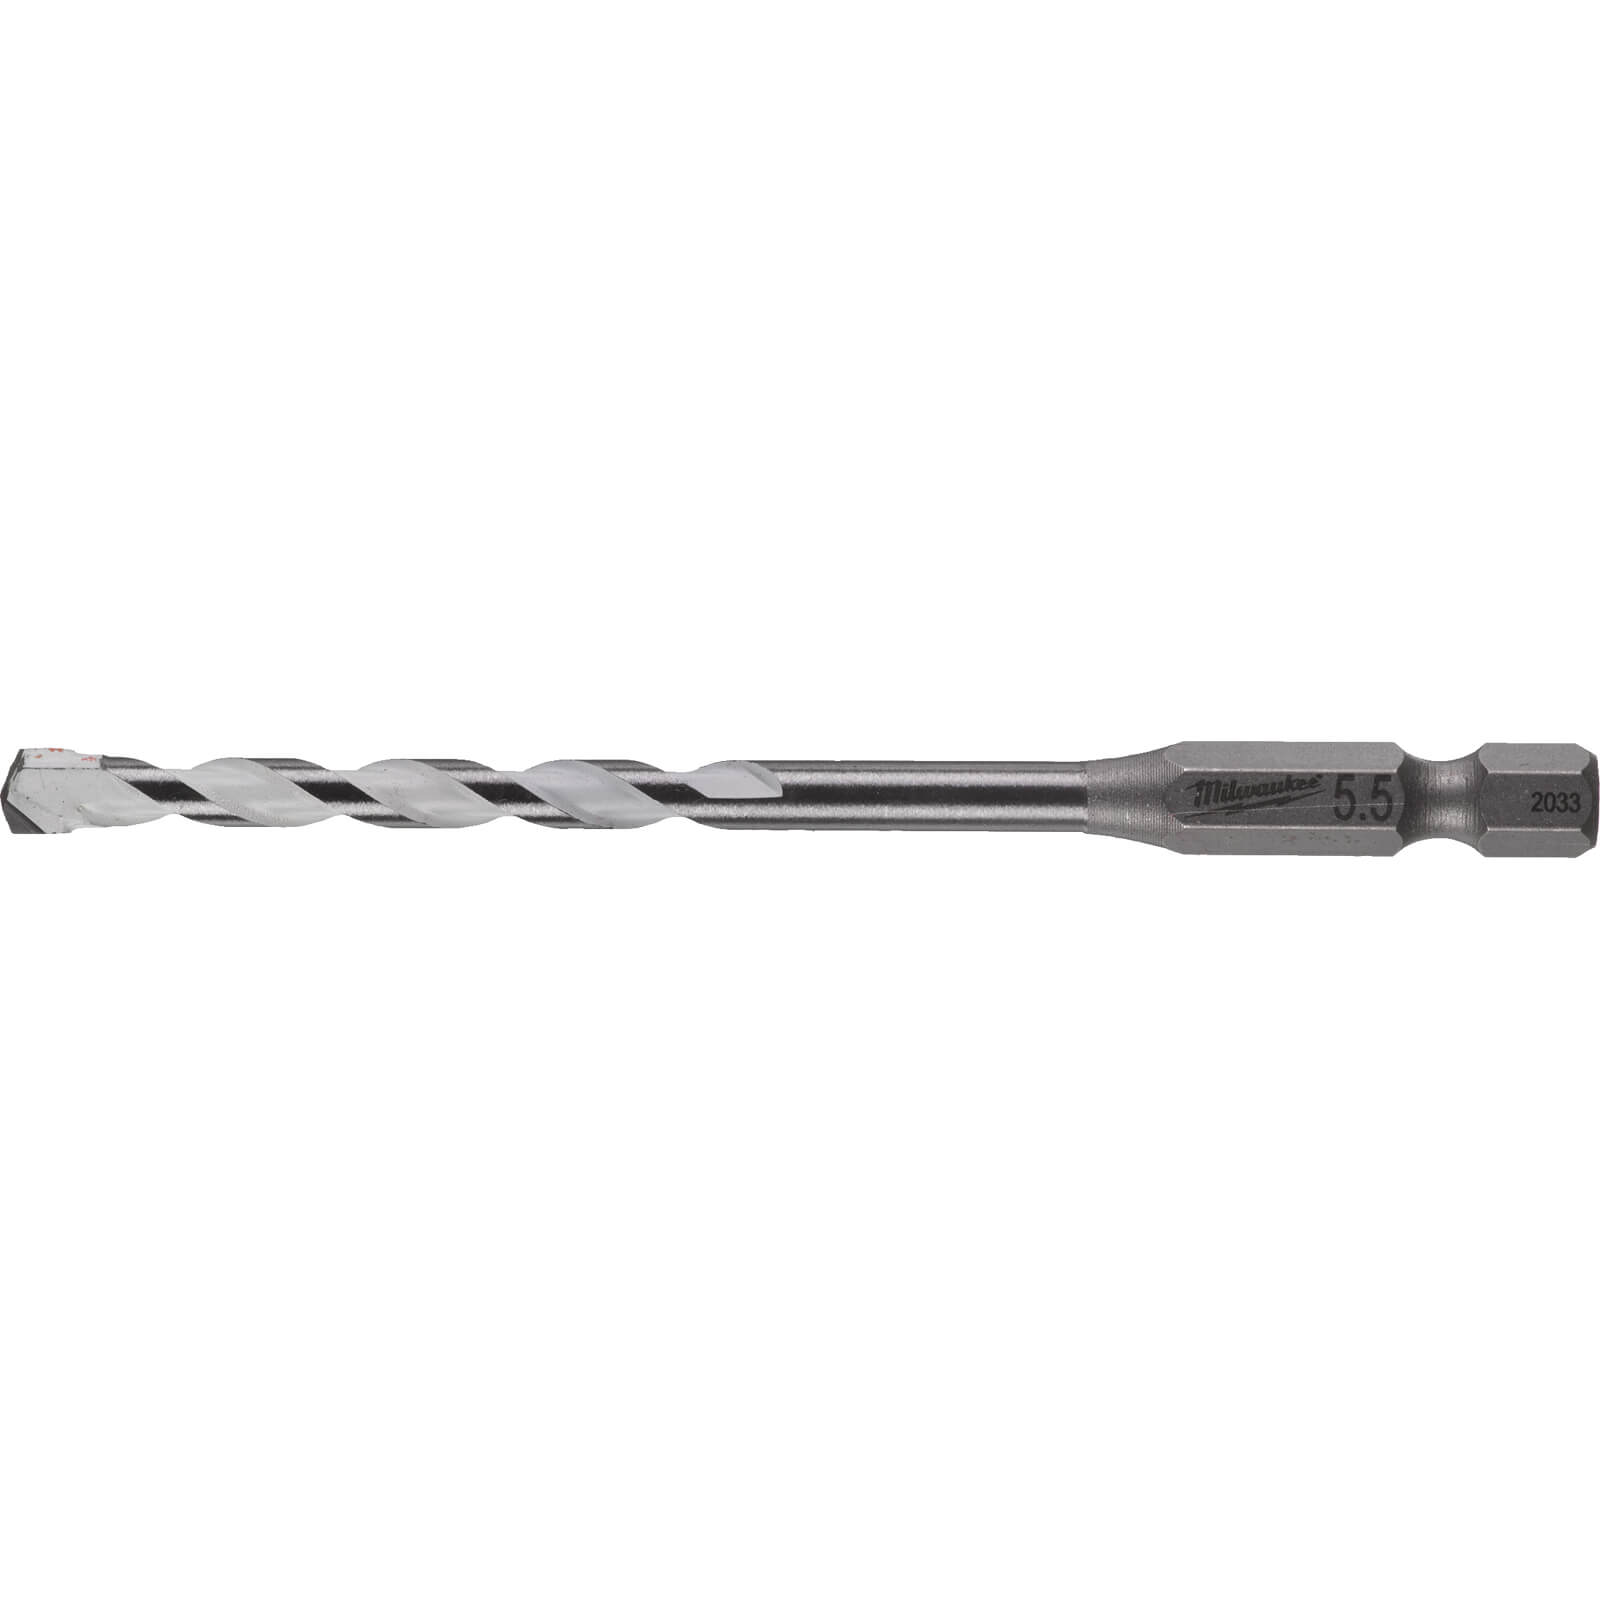 Photos - Drill Bit Milwaukee Multi Material Drill 5.5mm 100mm Pack of 1 4932471094 